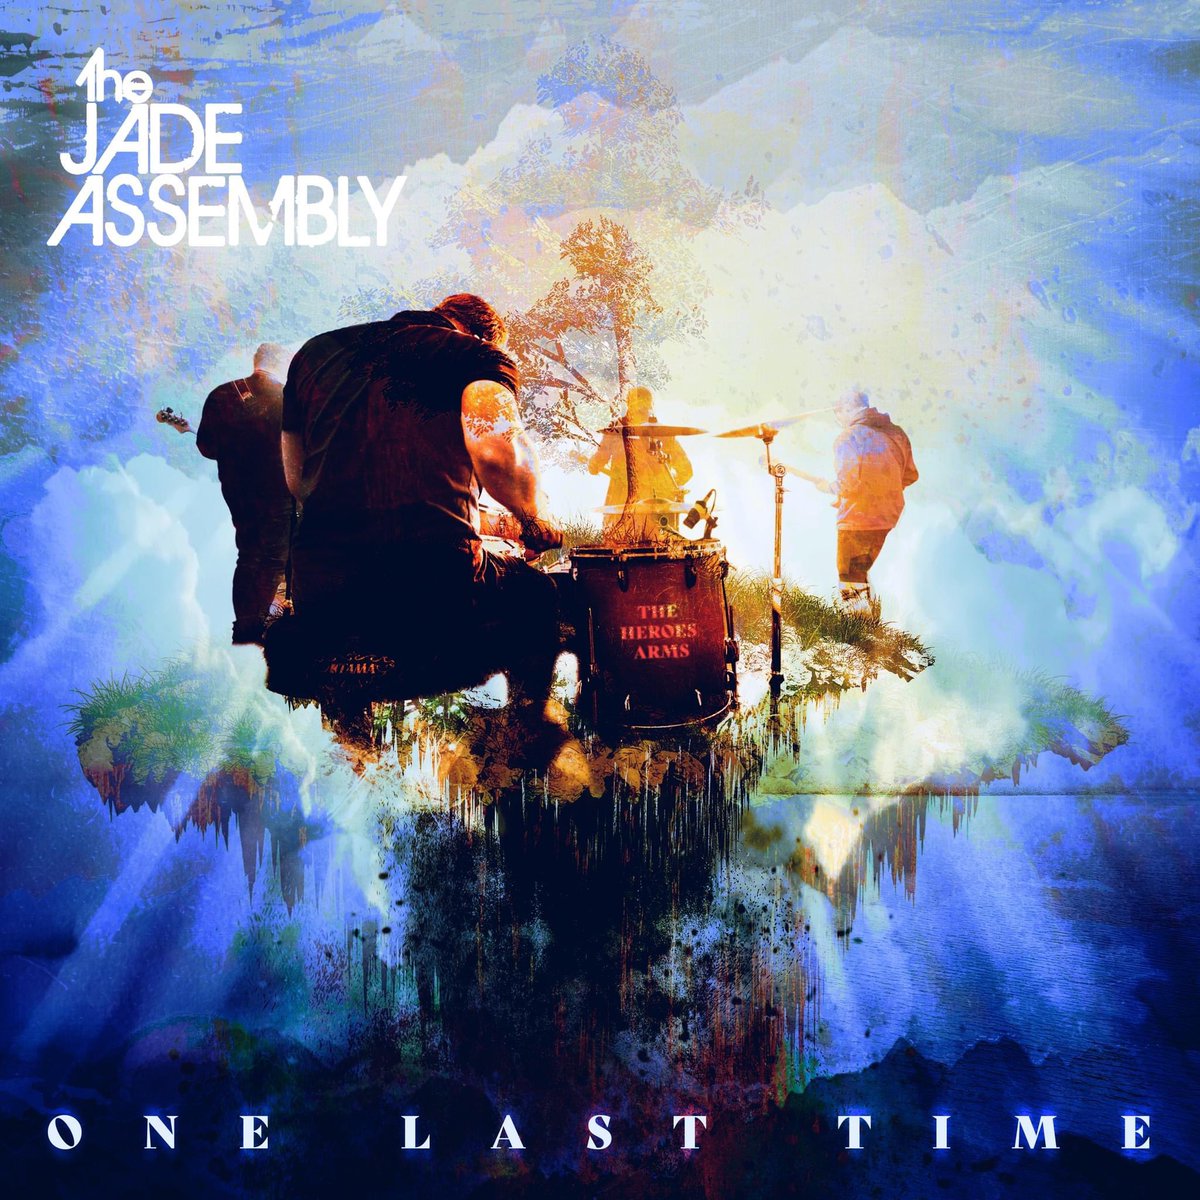 15 years in the making ❤️ ONE LAST TIME - OUT NOW AVAILABLE ON ALL MAJOR PLATFORMS #JADEARMY #ONELASTTIME open.spotify.com/album/6ar7lJUp…